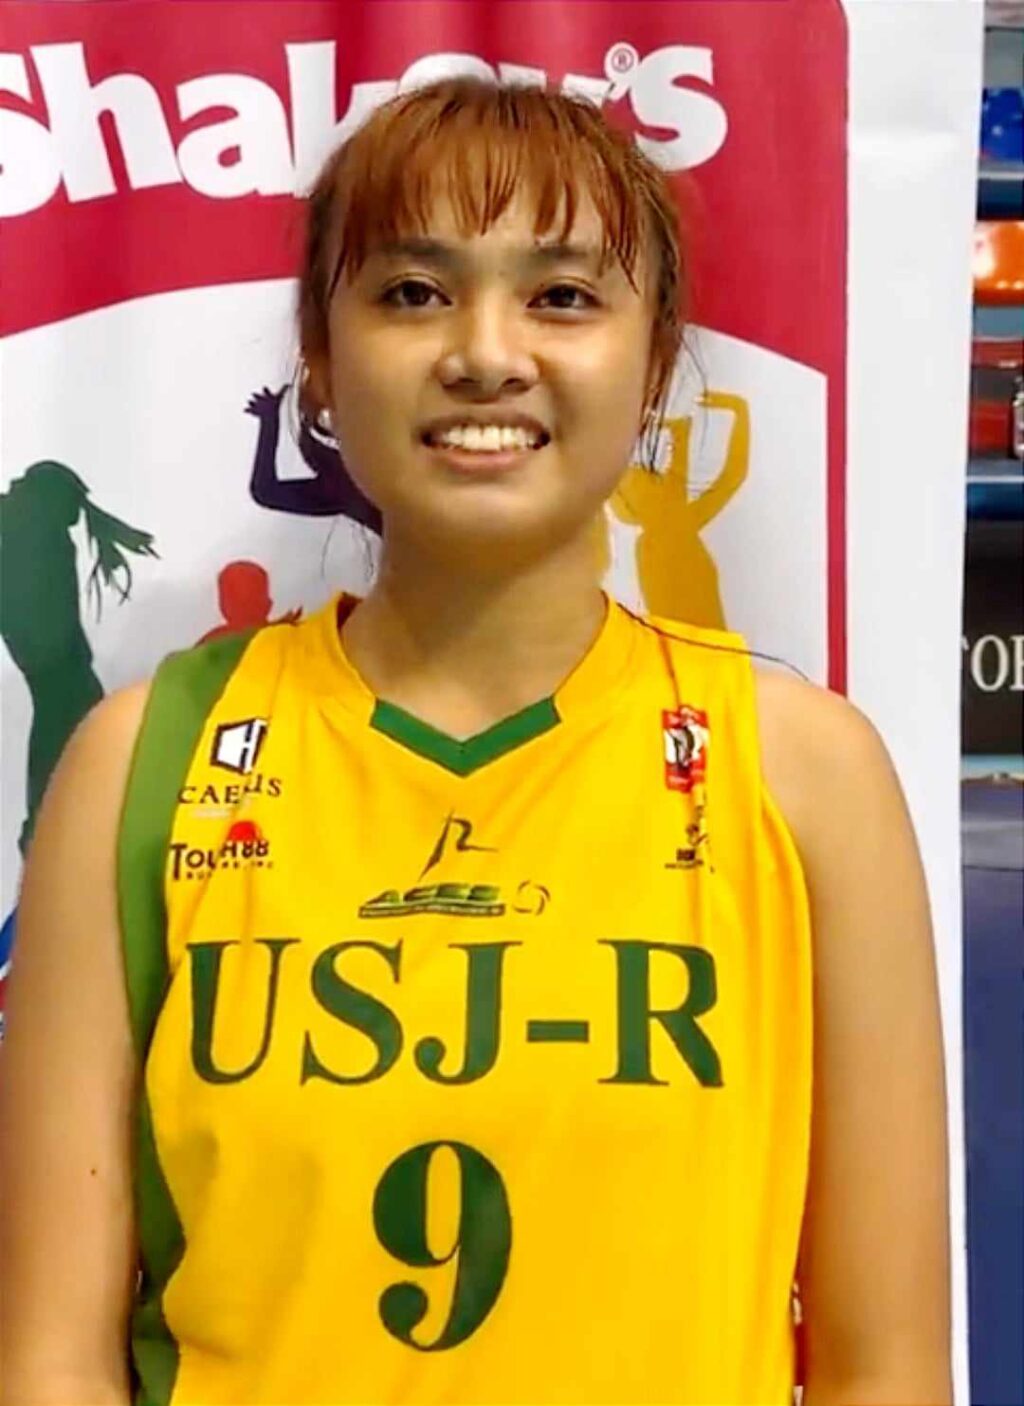 USJ-R Lady Jaguars opens Shakeys Super League Nat'l Invitationals with a win over DLSU-Dasma. USJ-R's Louneth Marie Abangan during the Shakey's Super League women's post-match interview. | Screen grab from Shakey's Super League Twitter video